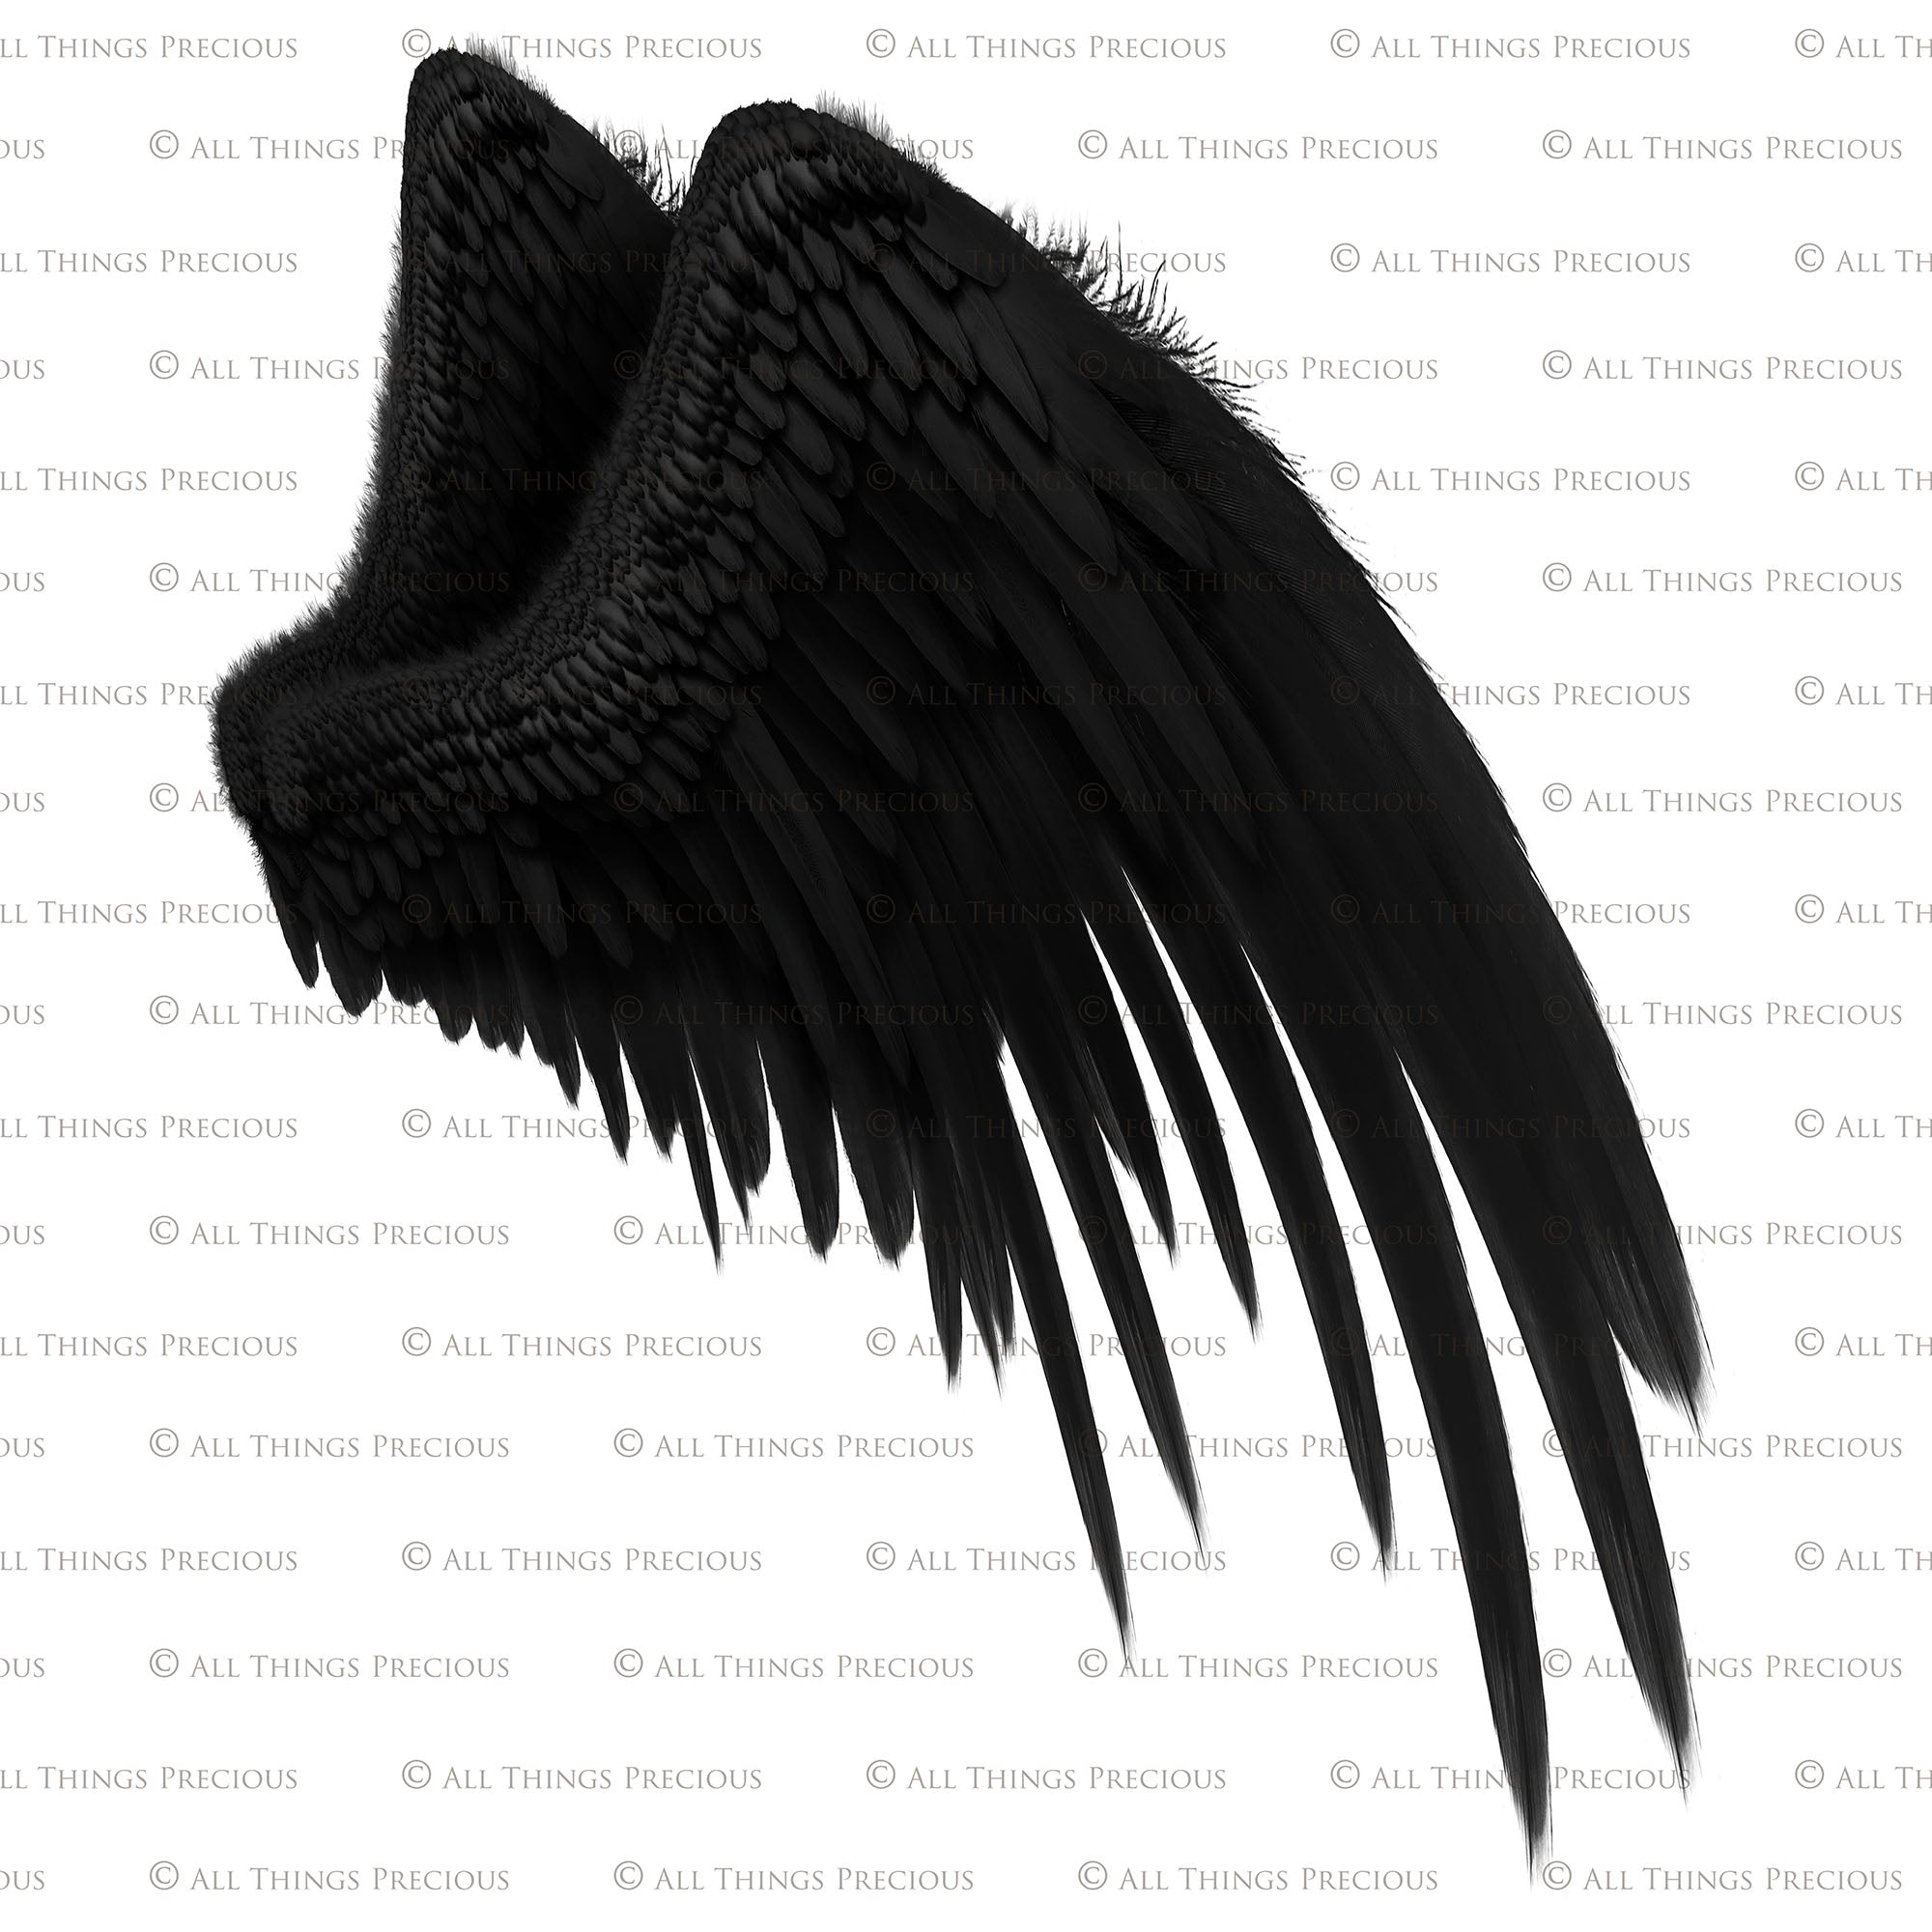 Png Angel Wings, Png Wings, Wing Overlays, Angel Clipart, Clipart wings, Png Overlays, Photo Editing, Photoshop, High Resolution, ATP textures.